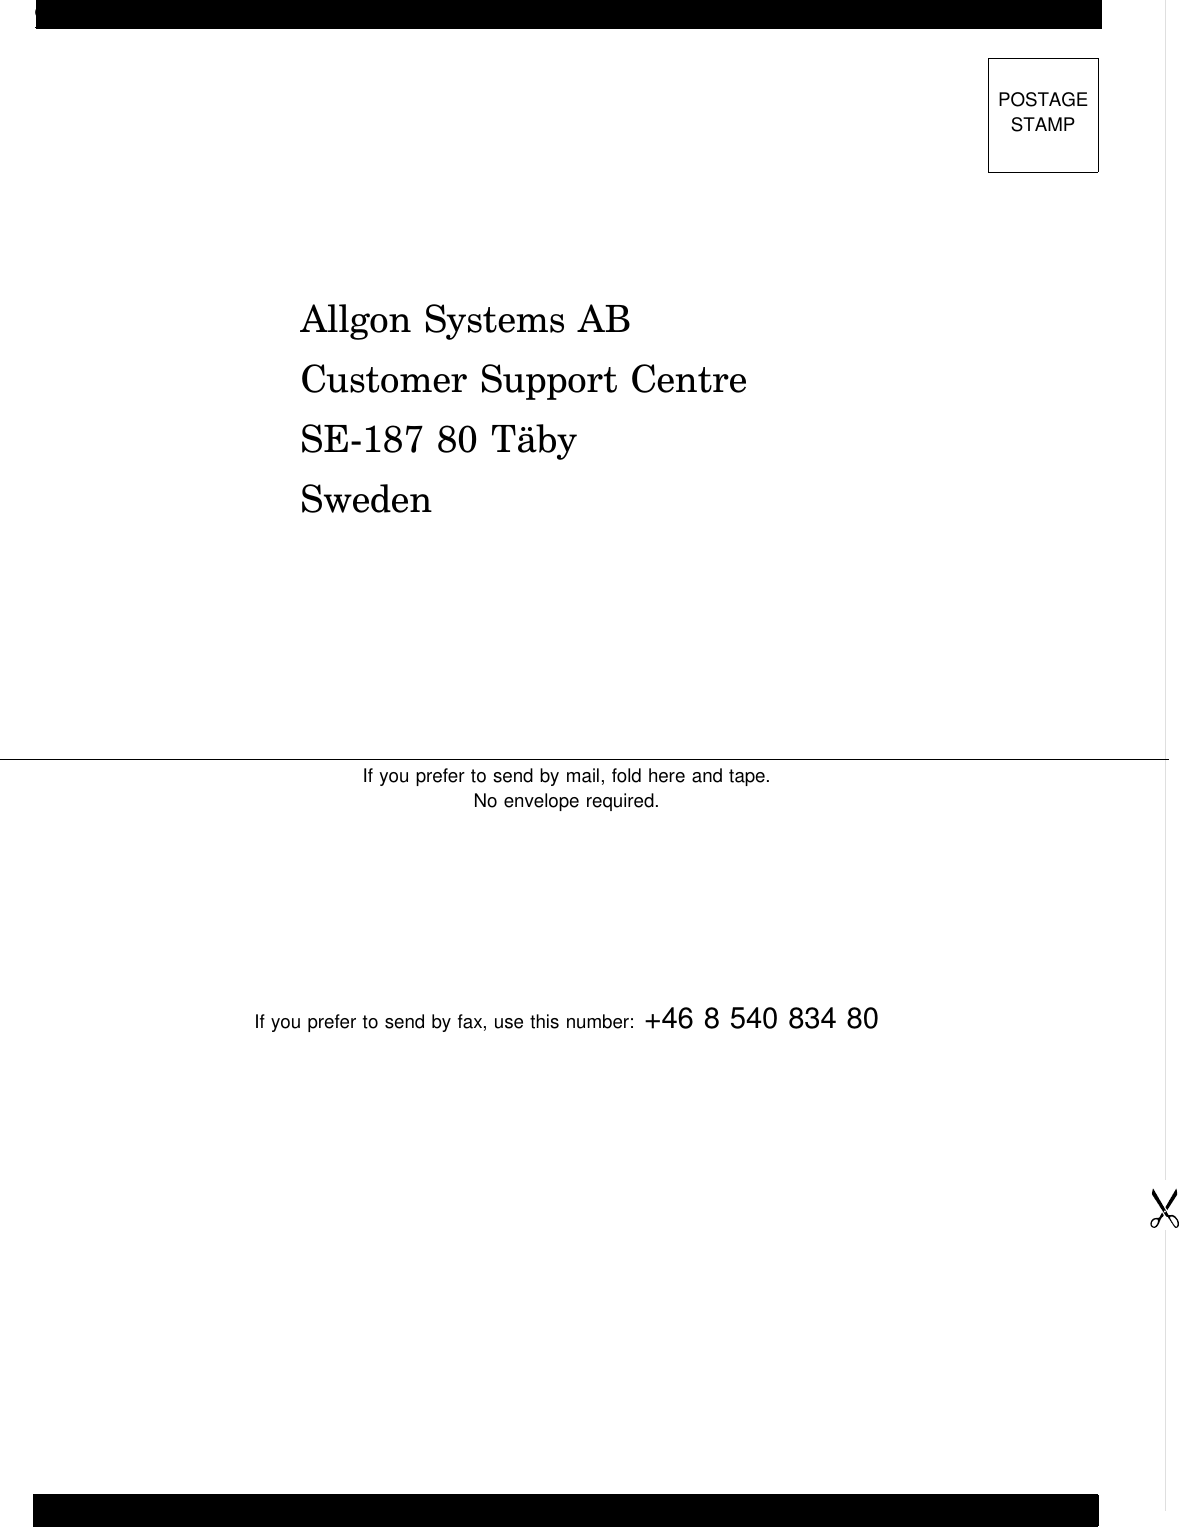 Allgon Systems ABCustomer Support CentreSE-187 80 TäbySwedenIf you prefer to send by mail, fold here and tape.No envelope required.If you prefer to send by fax, use this number: +46 8 540 834 80POSTAGESTAMP Questionnaire AR Repeaters Allgon Systems ABQ - 2 Rev. P1A  2000-09 VD203 66/EN - User’s Manual